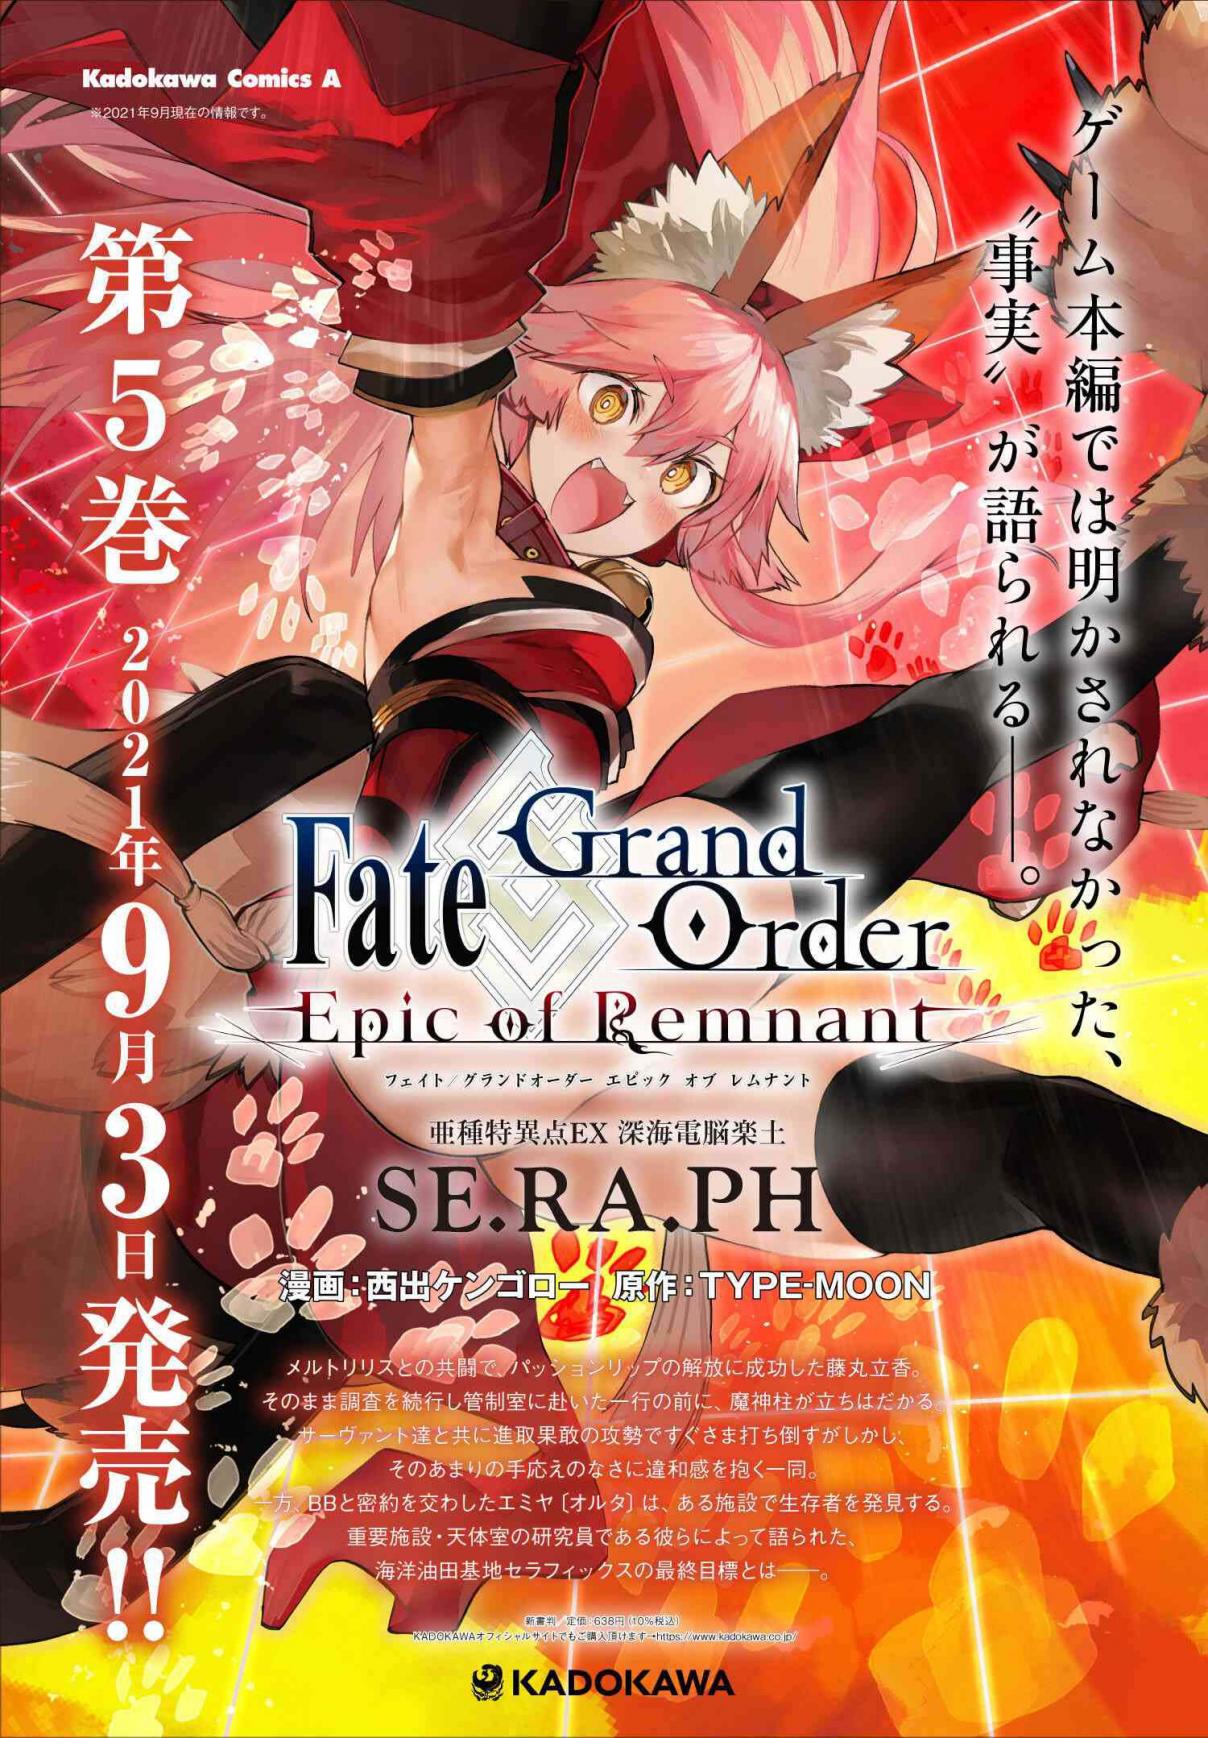 Fate/Grand Order -Epic of Remnant- Deep Sea Cyber-Paradise, SE.RA.PH 26.1